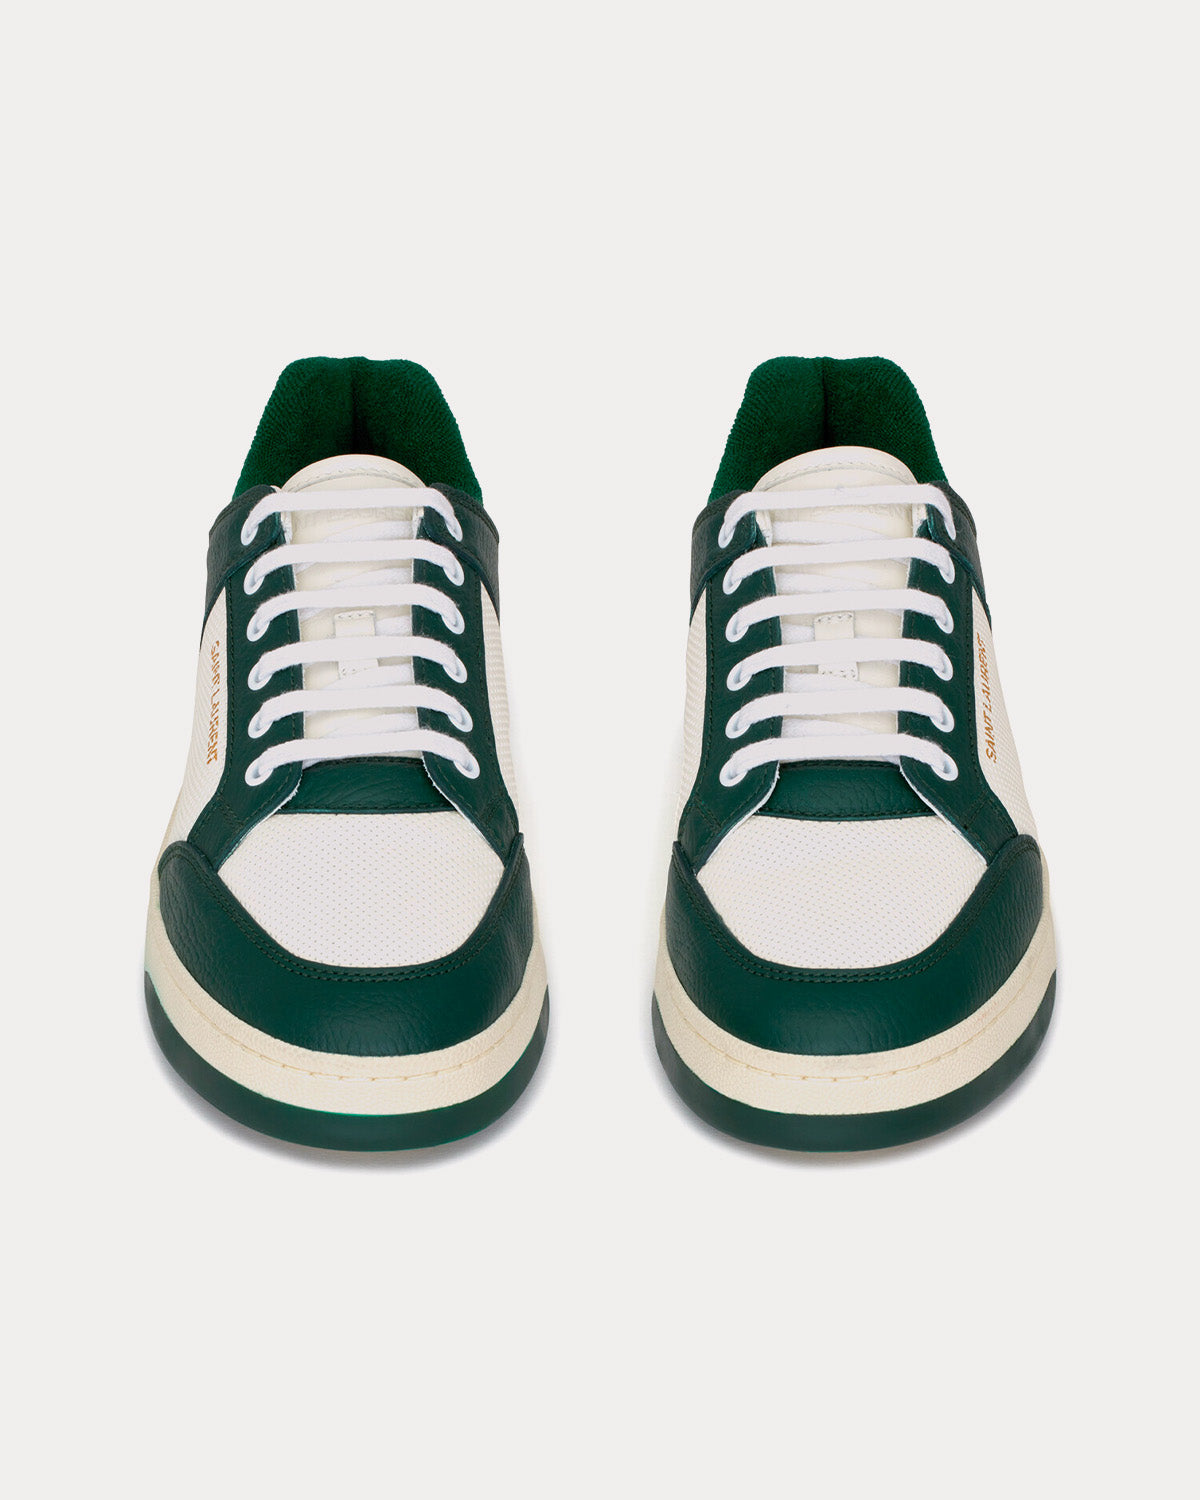 Saint Laurent - SL/61 Smooth & Grained Leather White / Dark Green Low Top Sneakers